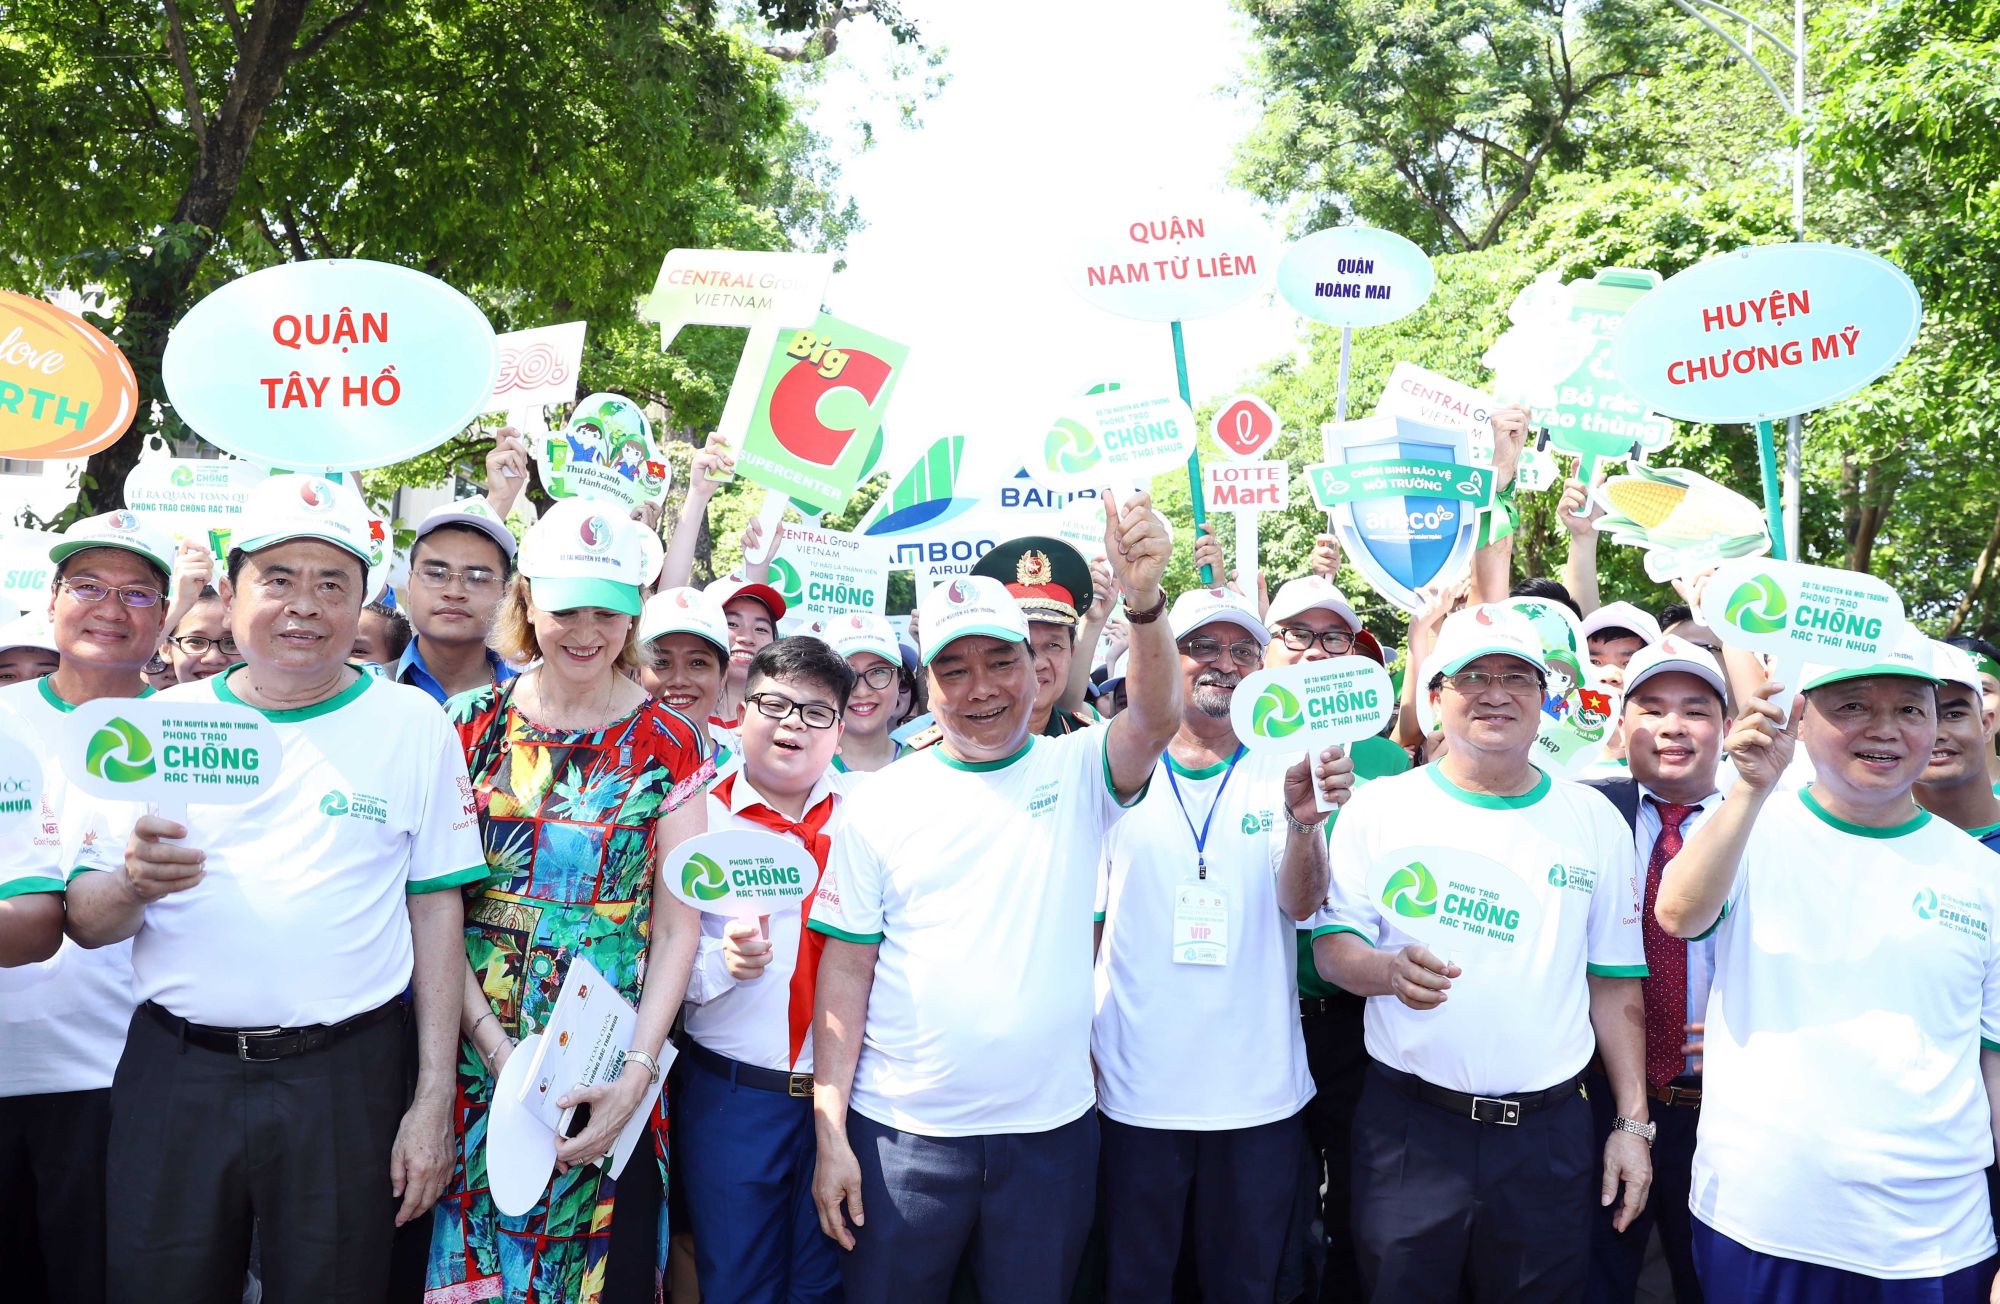 Prime Minister Nguyen Xuan Phuc and participants join a walking event to call for the community to act against plastic waste (Photo: VNA)